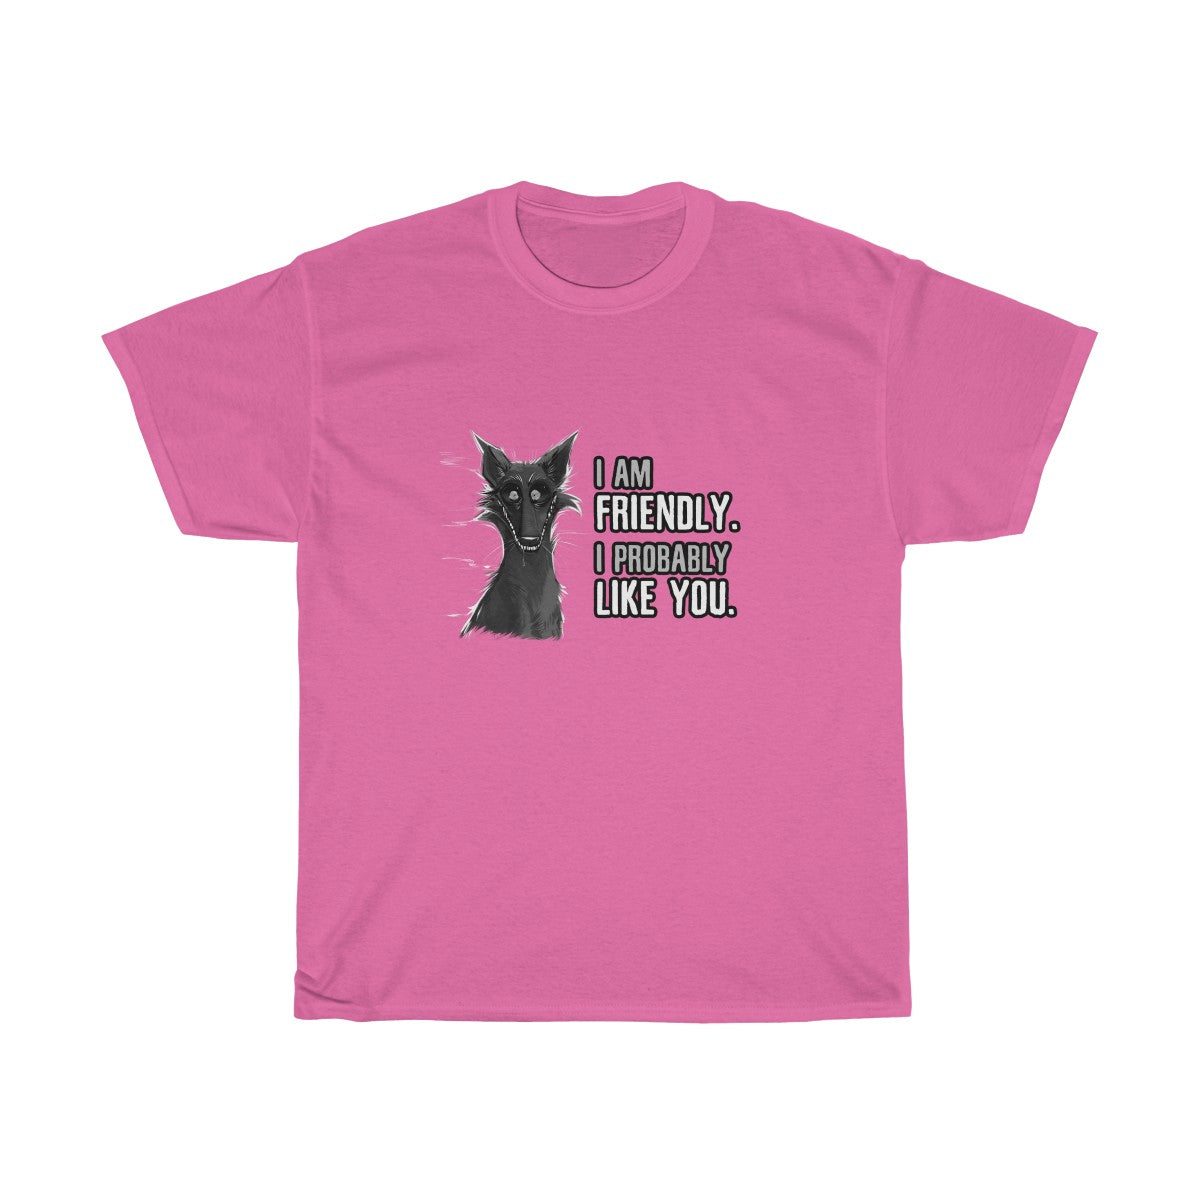 I probably DON'T hate you -T-Shirt T-Shirt Cyamallo Pink S 